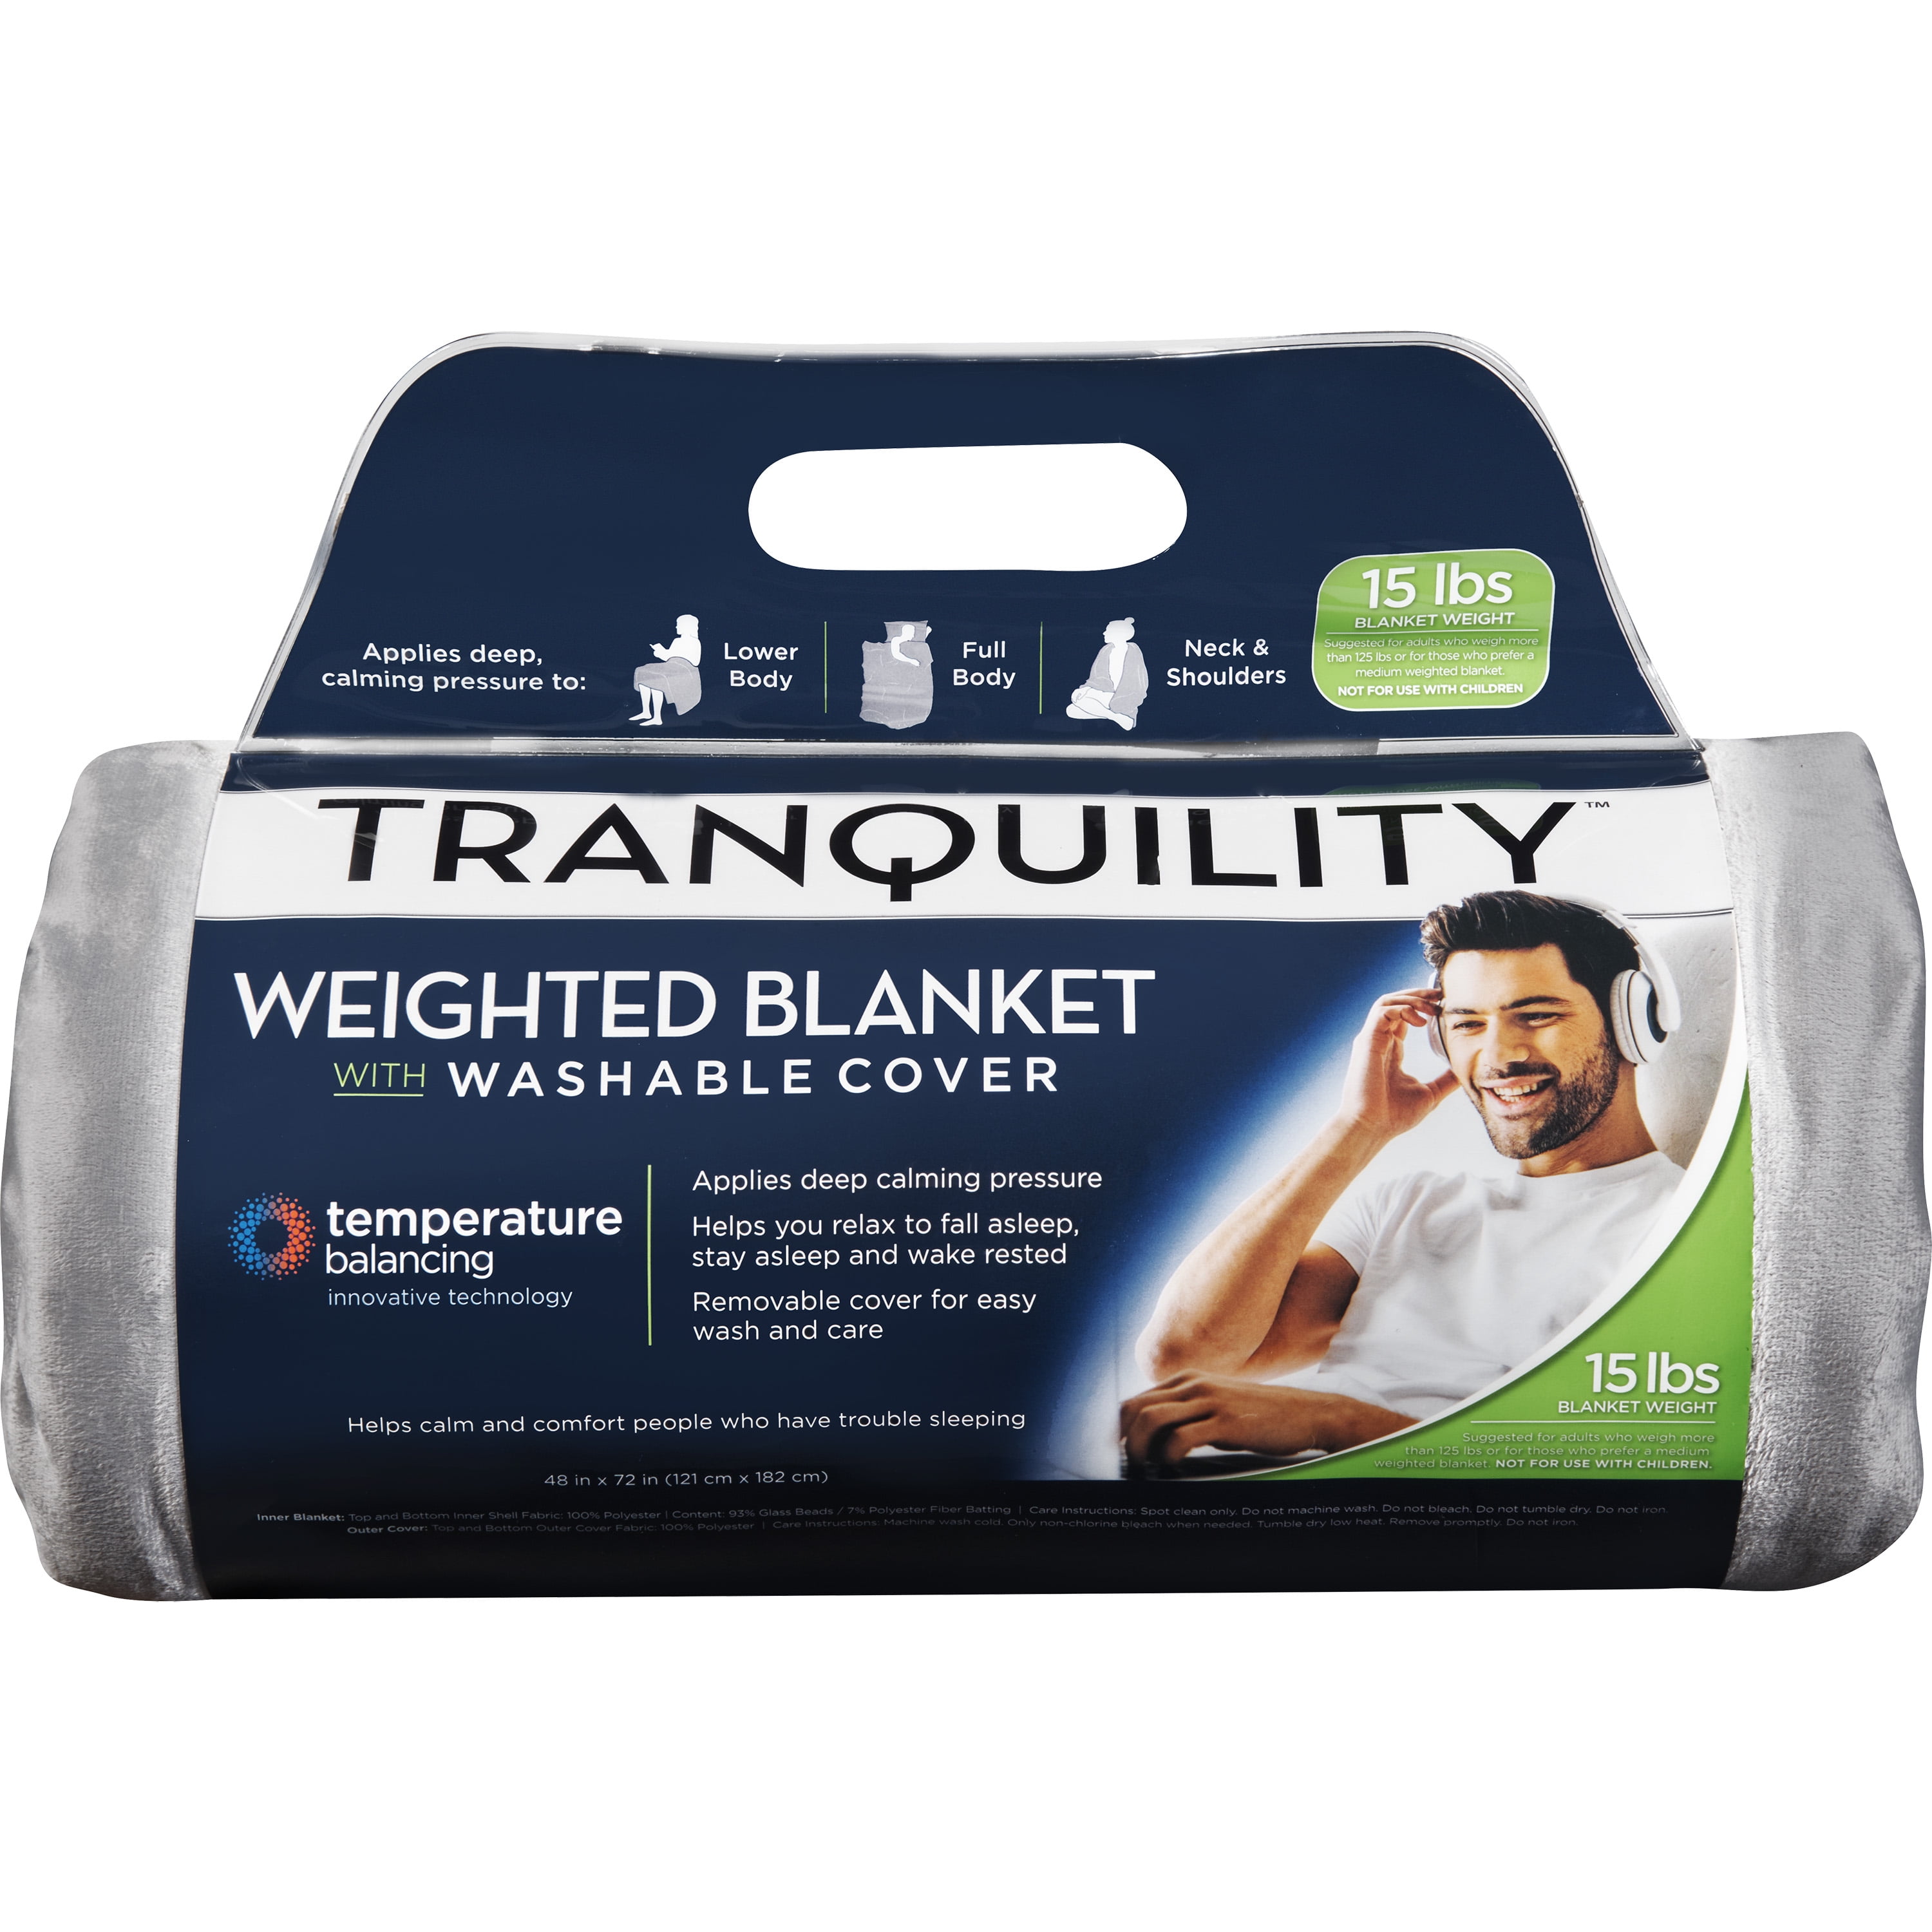 Tranquility Weighted Blanket 15lb, with Washable Cover - Temperature